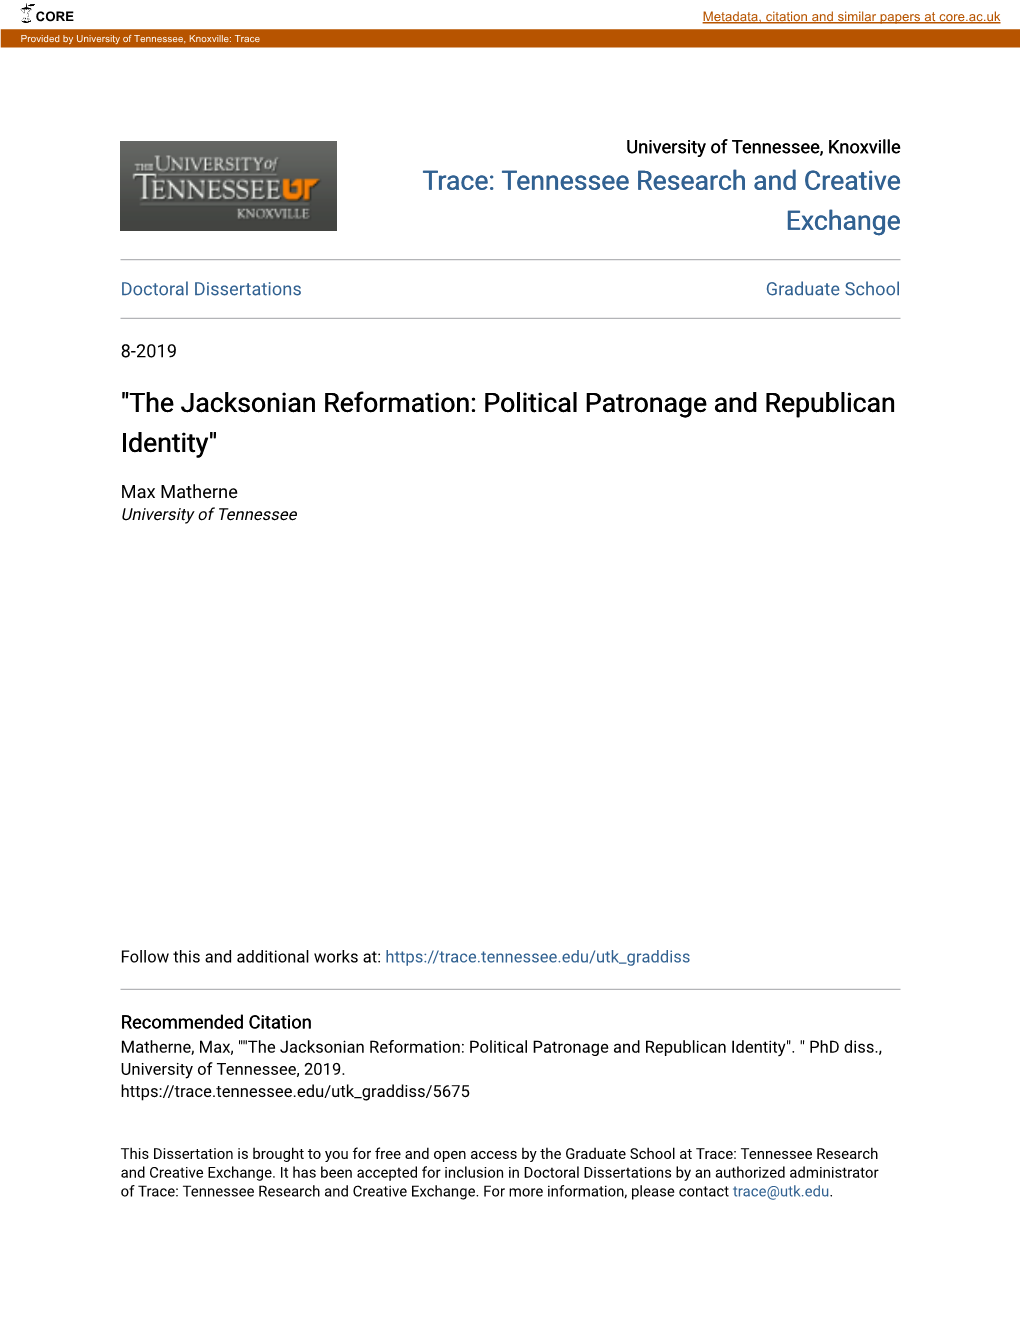 "The Jacksonian Reformation: Political Patronage and Republican Identity"